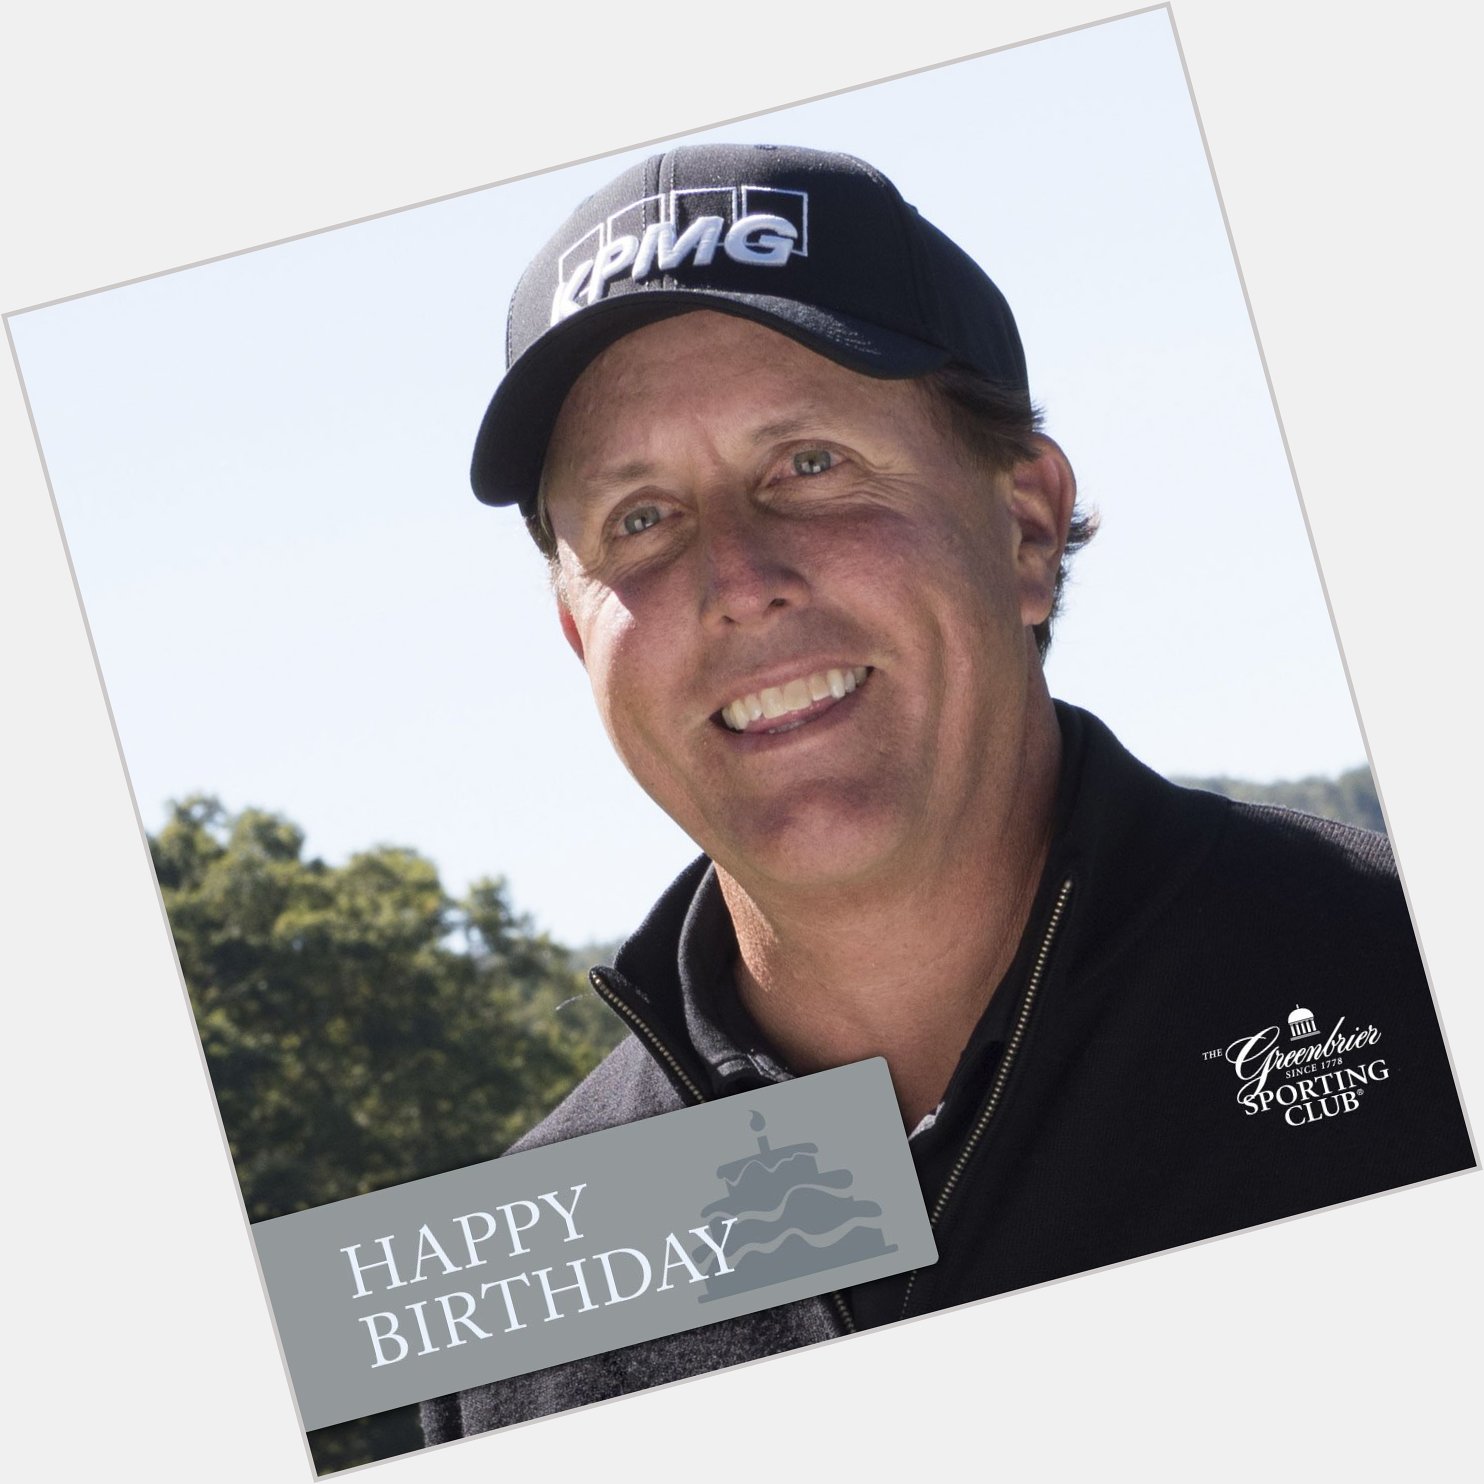 Happy Birthday Phil Mickelson! We are thrilled to have you and your family as part of the GSC family. 